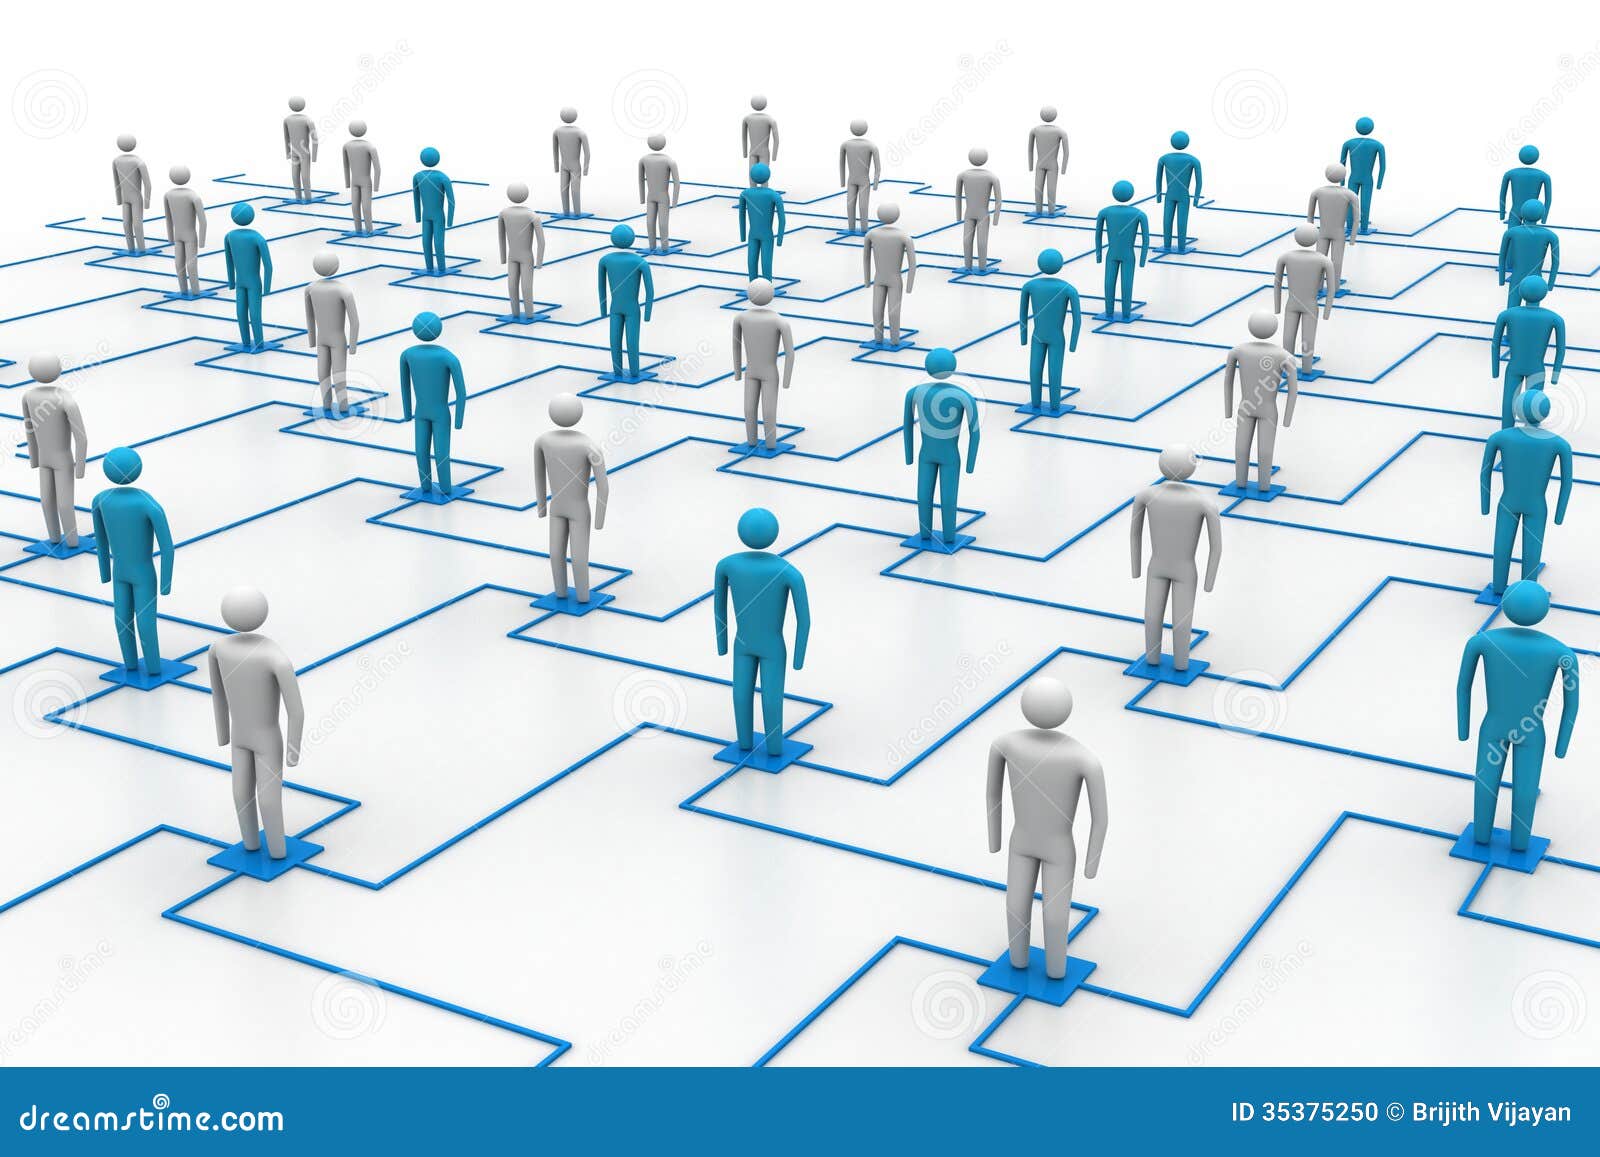 Network, Connecting People Stock Photo  Image: 35375250